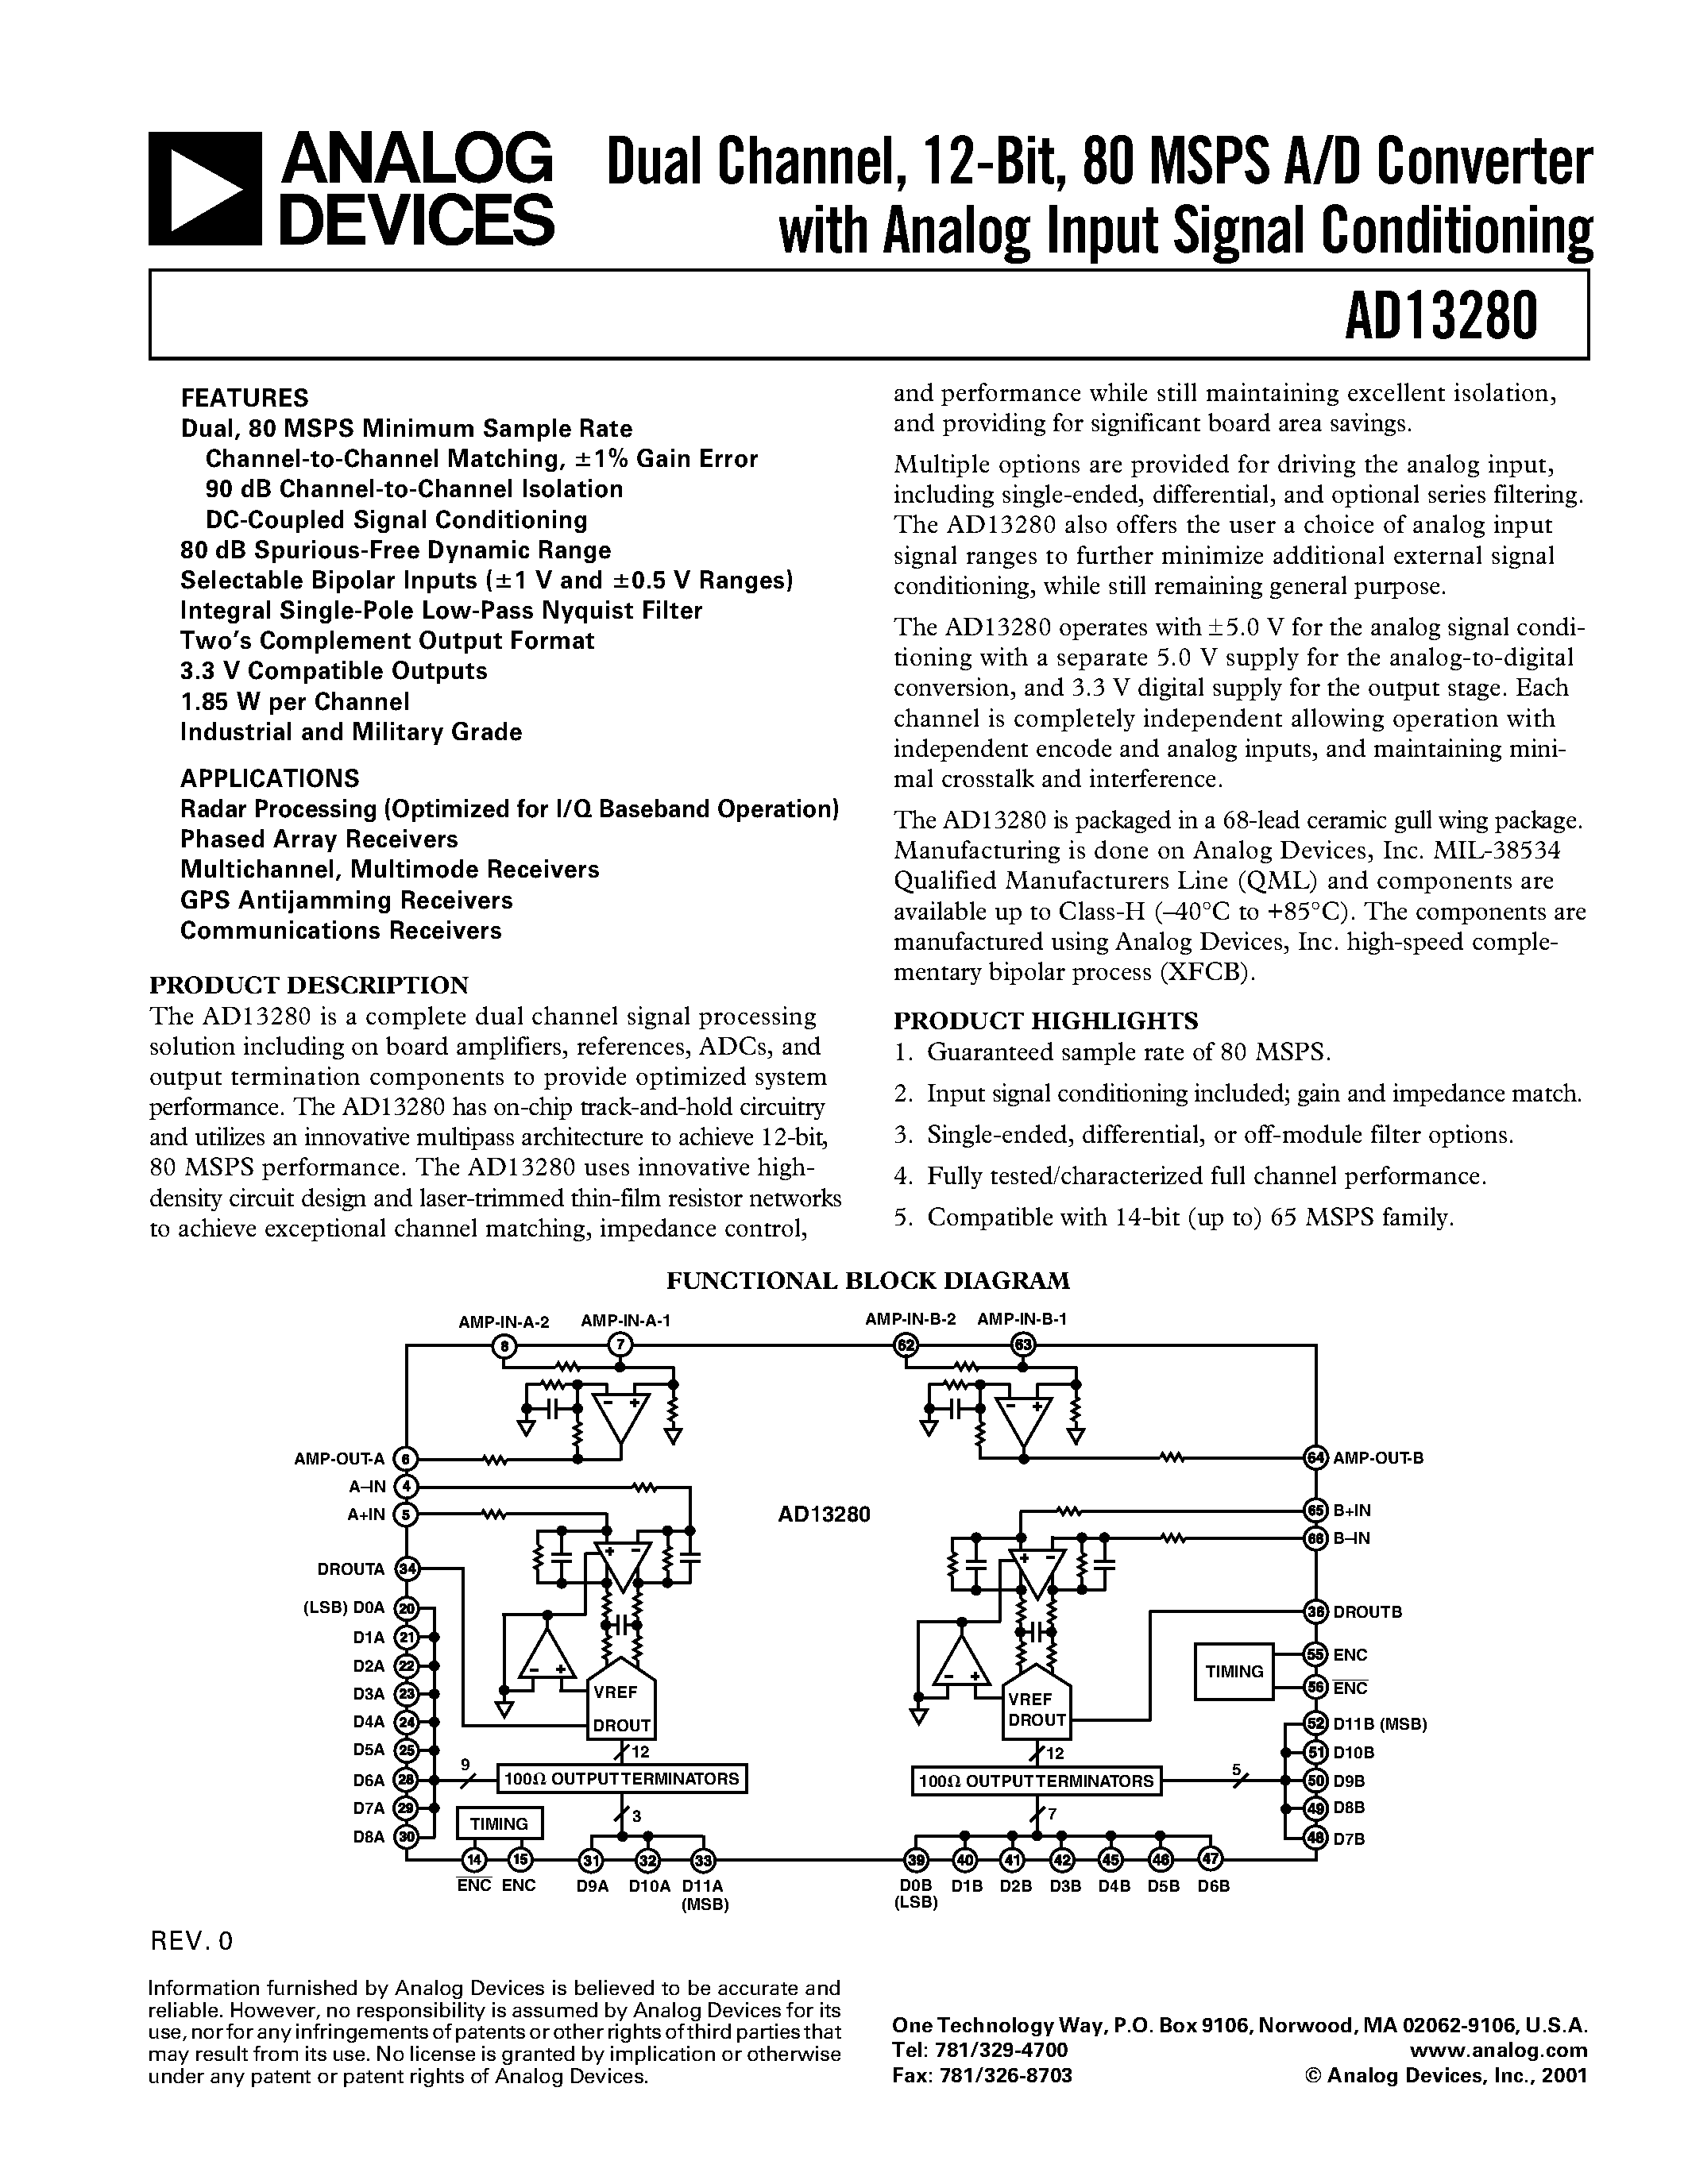 Datasheet AD13280AZ - Dual Channel/ 12-Bit/ 80 MSPS A/D Converter with Analog Input Signal Conditioning page 1